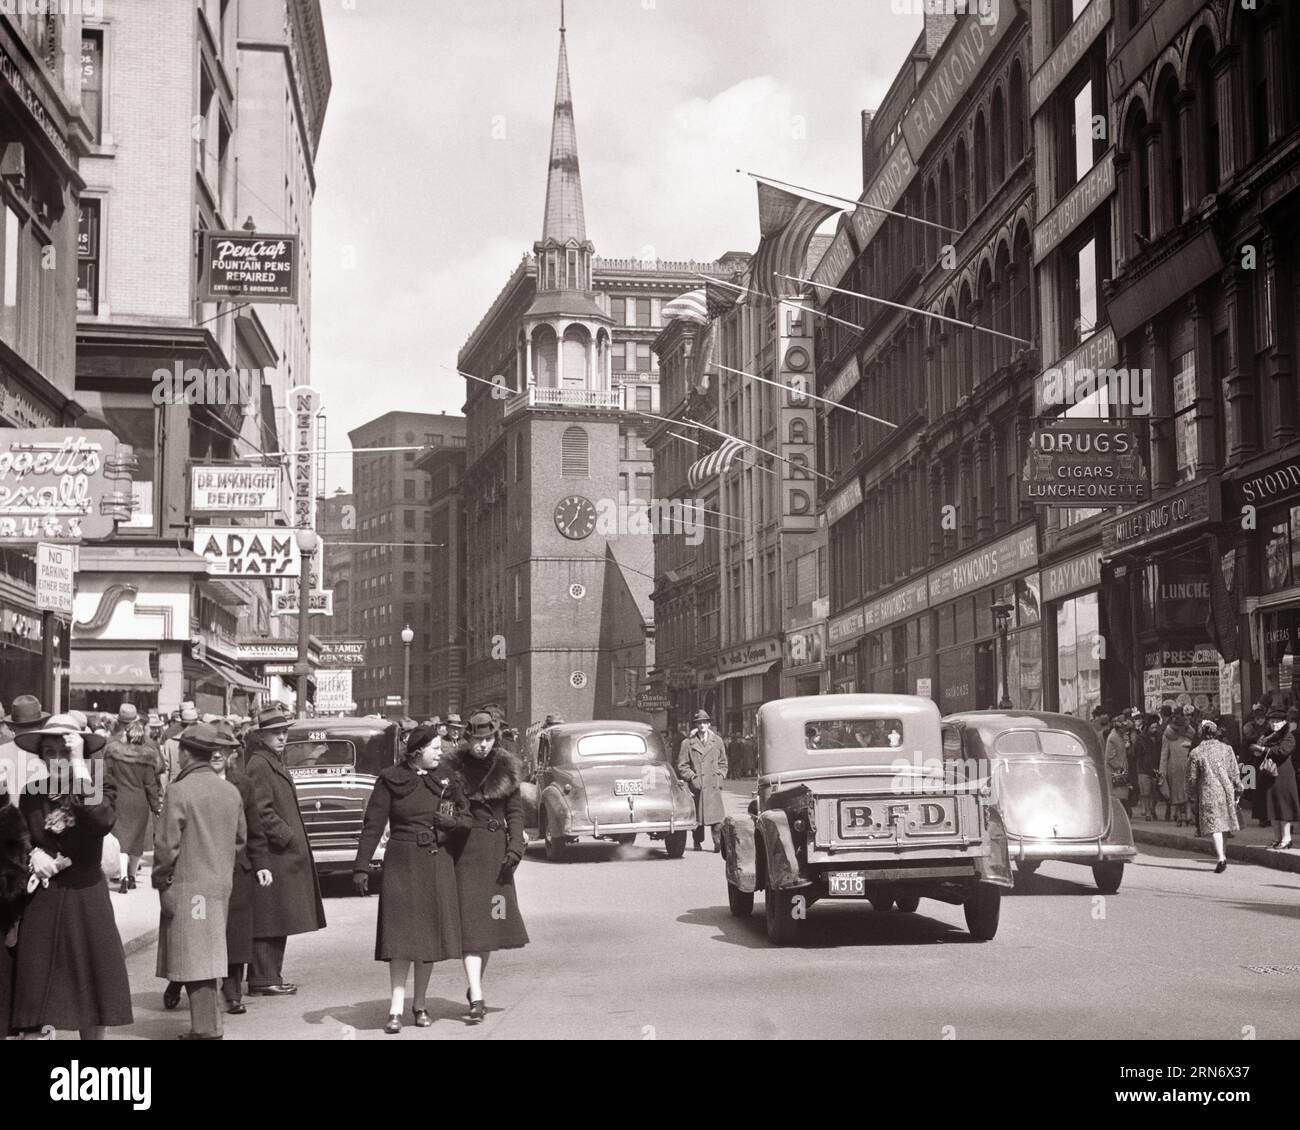 1940s TRAFFIC & PEDESTRIANS ON BUSY WASHINGTON STREET WITH SPIRE OF OLD SOUTH CHURCH IN THE BACKGROUND BOSTON MASSACHUSETTS USA - q40464 CPC001 HARS ARCHITECTURE FEMALES COATS TRANSPORT COPY SPACE FULL-LENGTH LADIES PERSONS SHOPS MALES CHRISTIAN PEDESTRIANS TRANSPORTATION B&W MASSACHUSETTS SHOPPER SHOPPERS STRUCTURE RELIGIOUS CHRISTIANITY EXCITEMENT STORES CITIES COMMERCE FAITH FURS MA NEW ENGLAND SPIRITUAL & BELIEF BLACK AND WHITE BUSINESSES INSPIRATIONAL OLD FASHIONED PICKUP TRUCK SPIRE Stock Photo